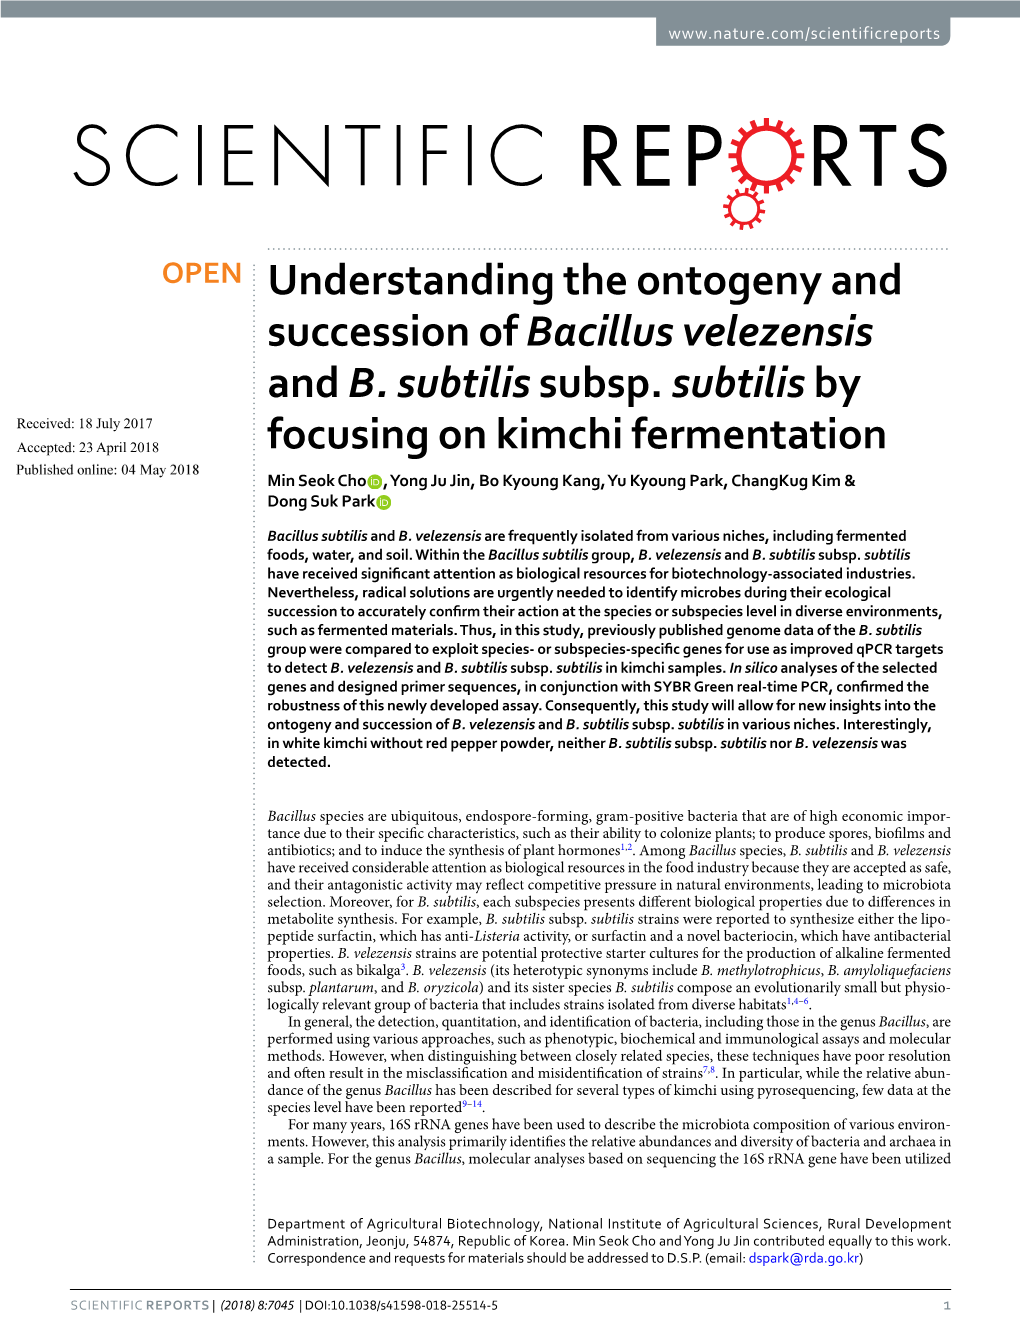 Understanding the Ontogeny and Succession of Bacillus Velezensis and B